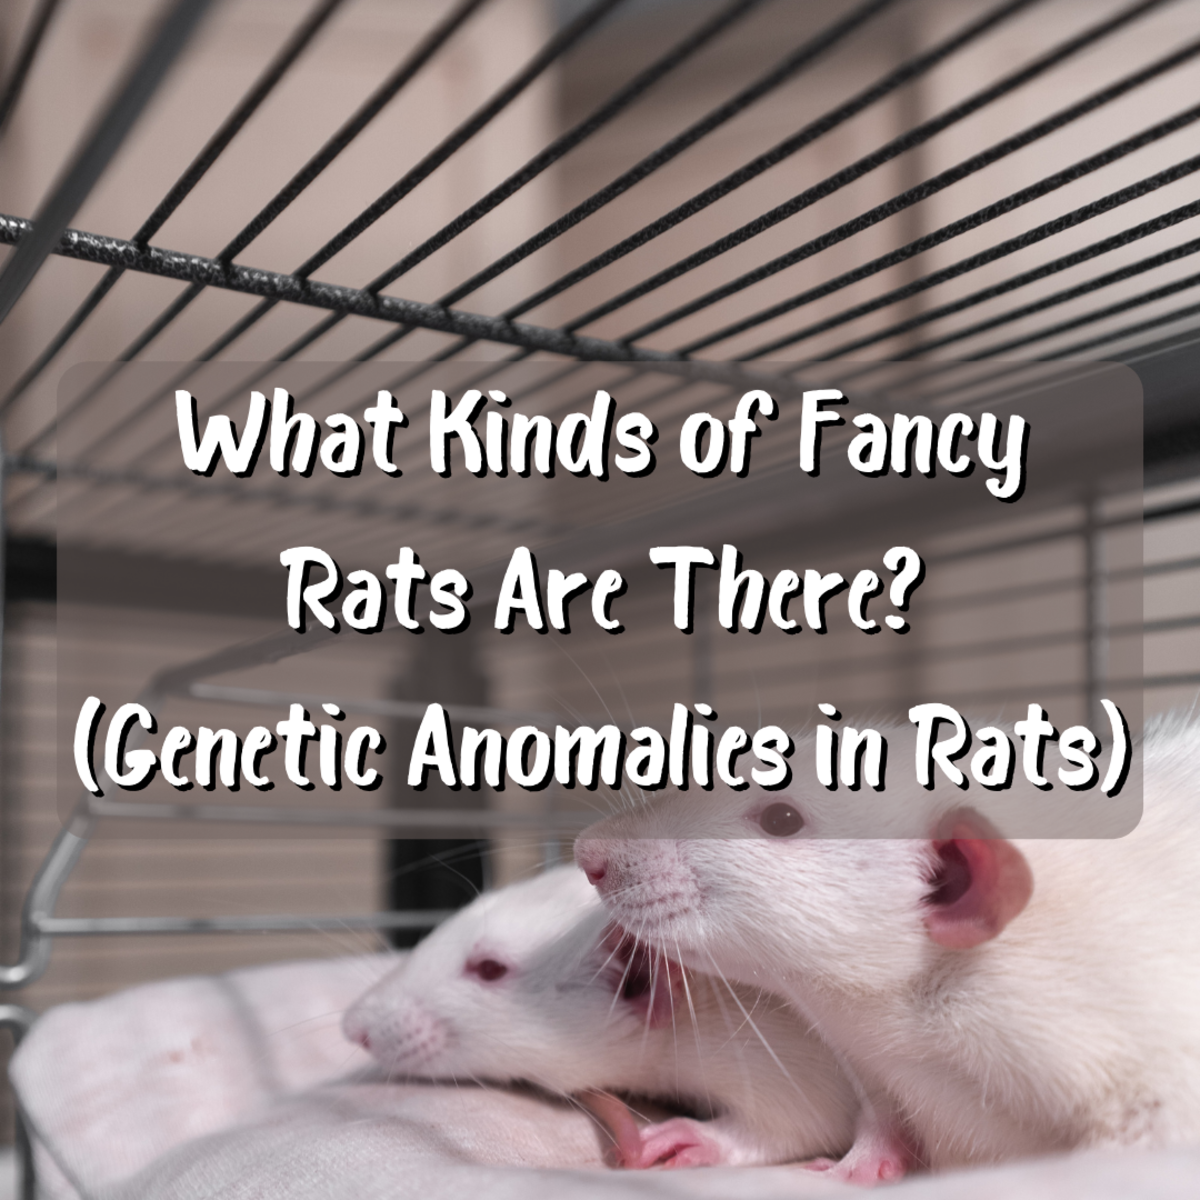 What Kinds of Fancy Rats Are There? (Genetic Anomalies in Rats)